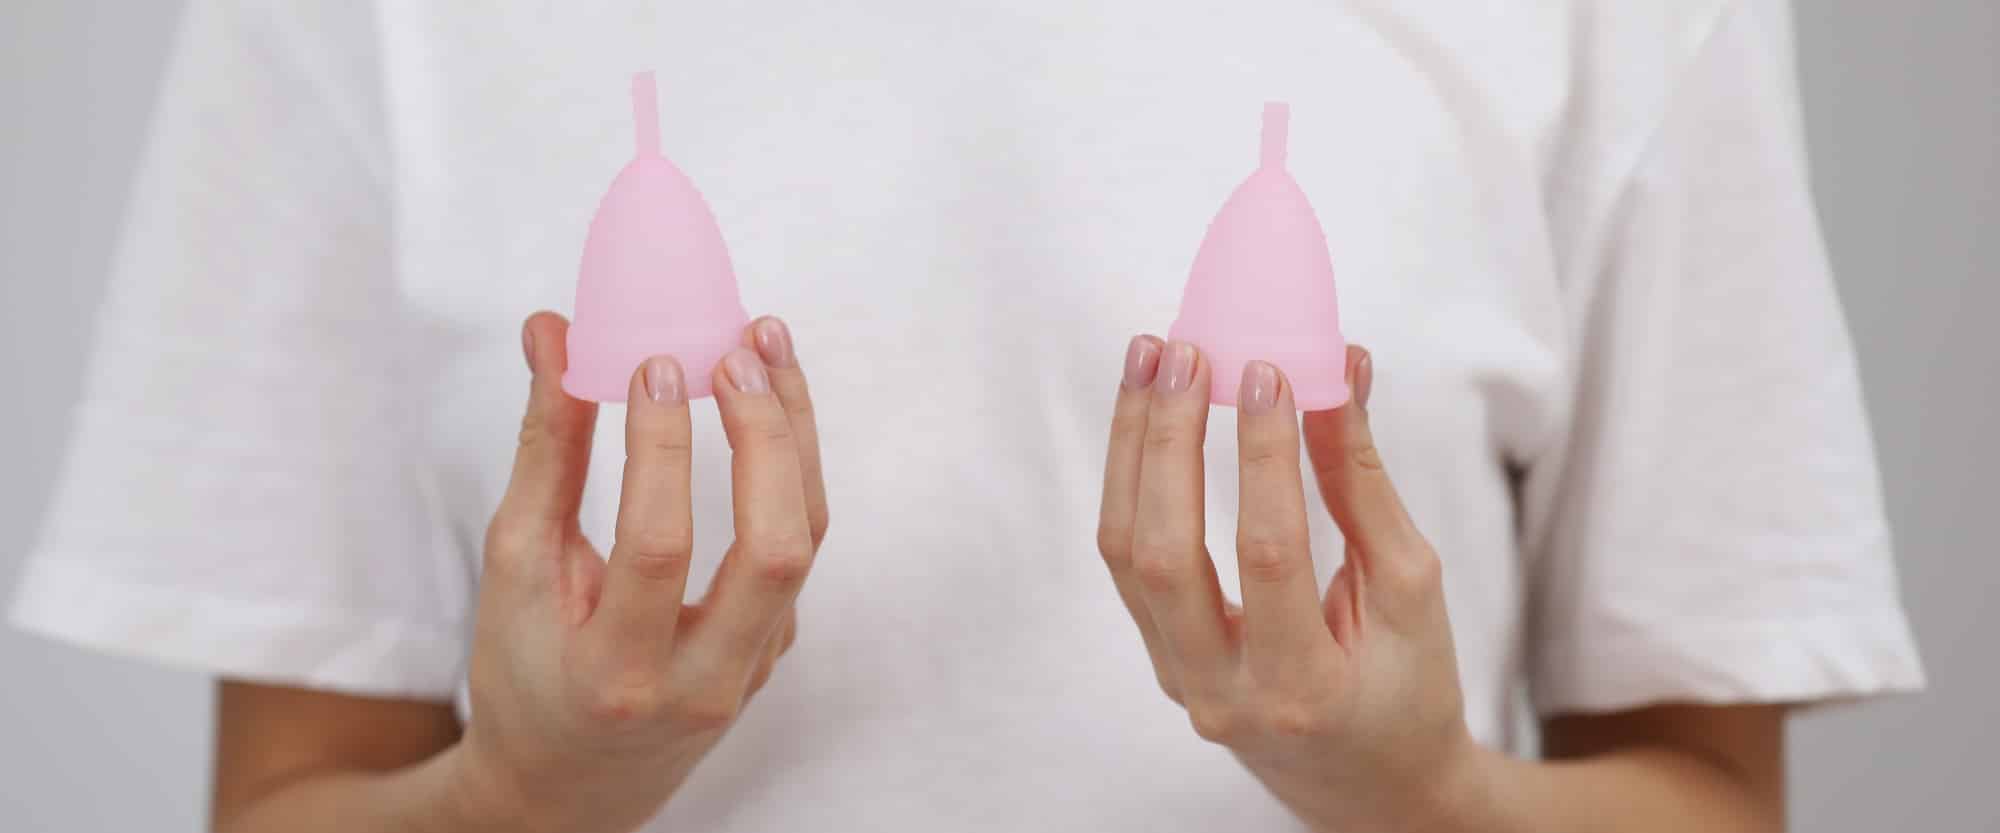 Menstrual Cups vs Tampons and Pads: Which is Best? – AllMatters